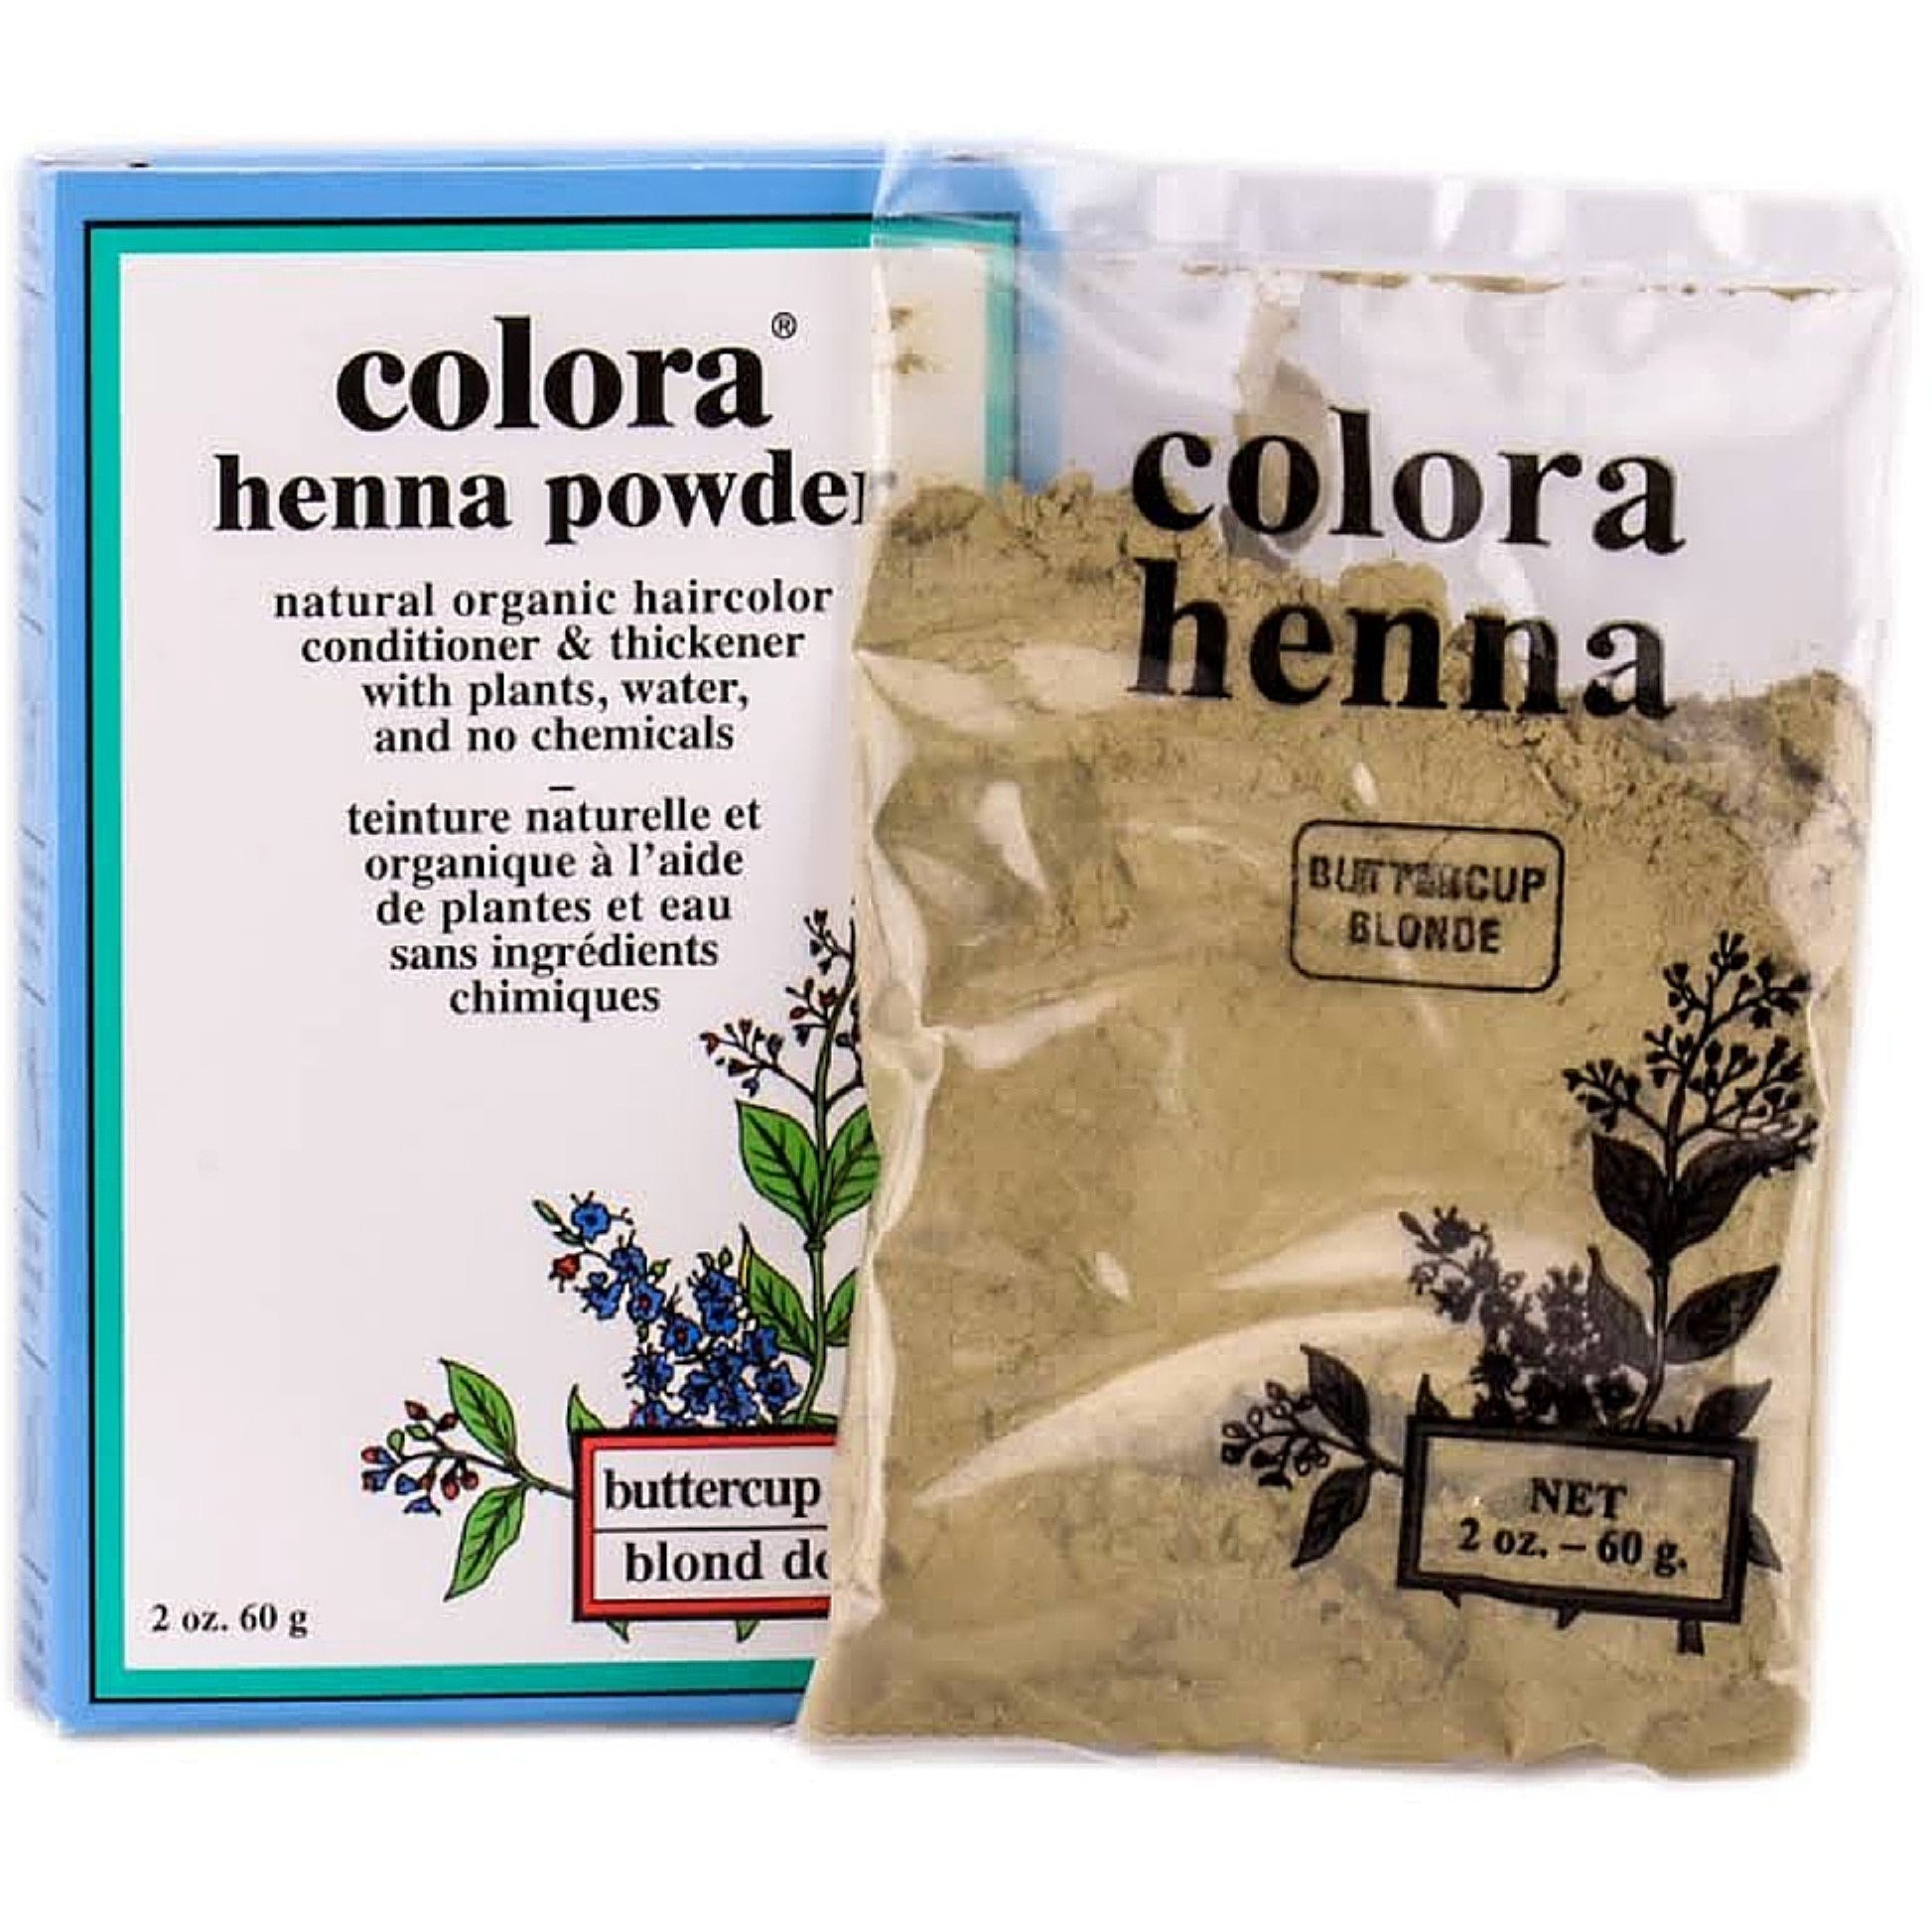 4th Ave Market: Colora Henna Powder, Buttercup Blonde